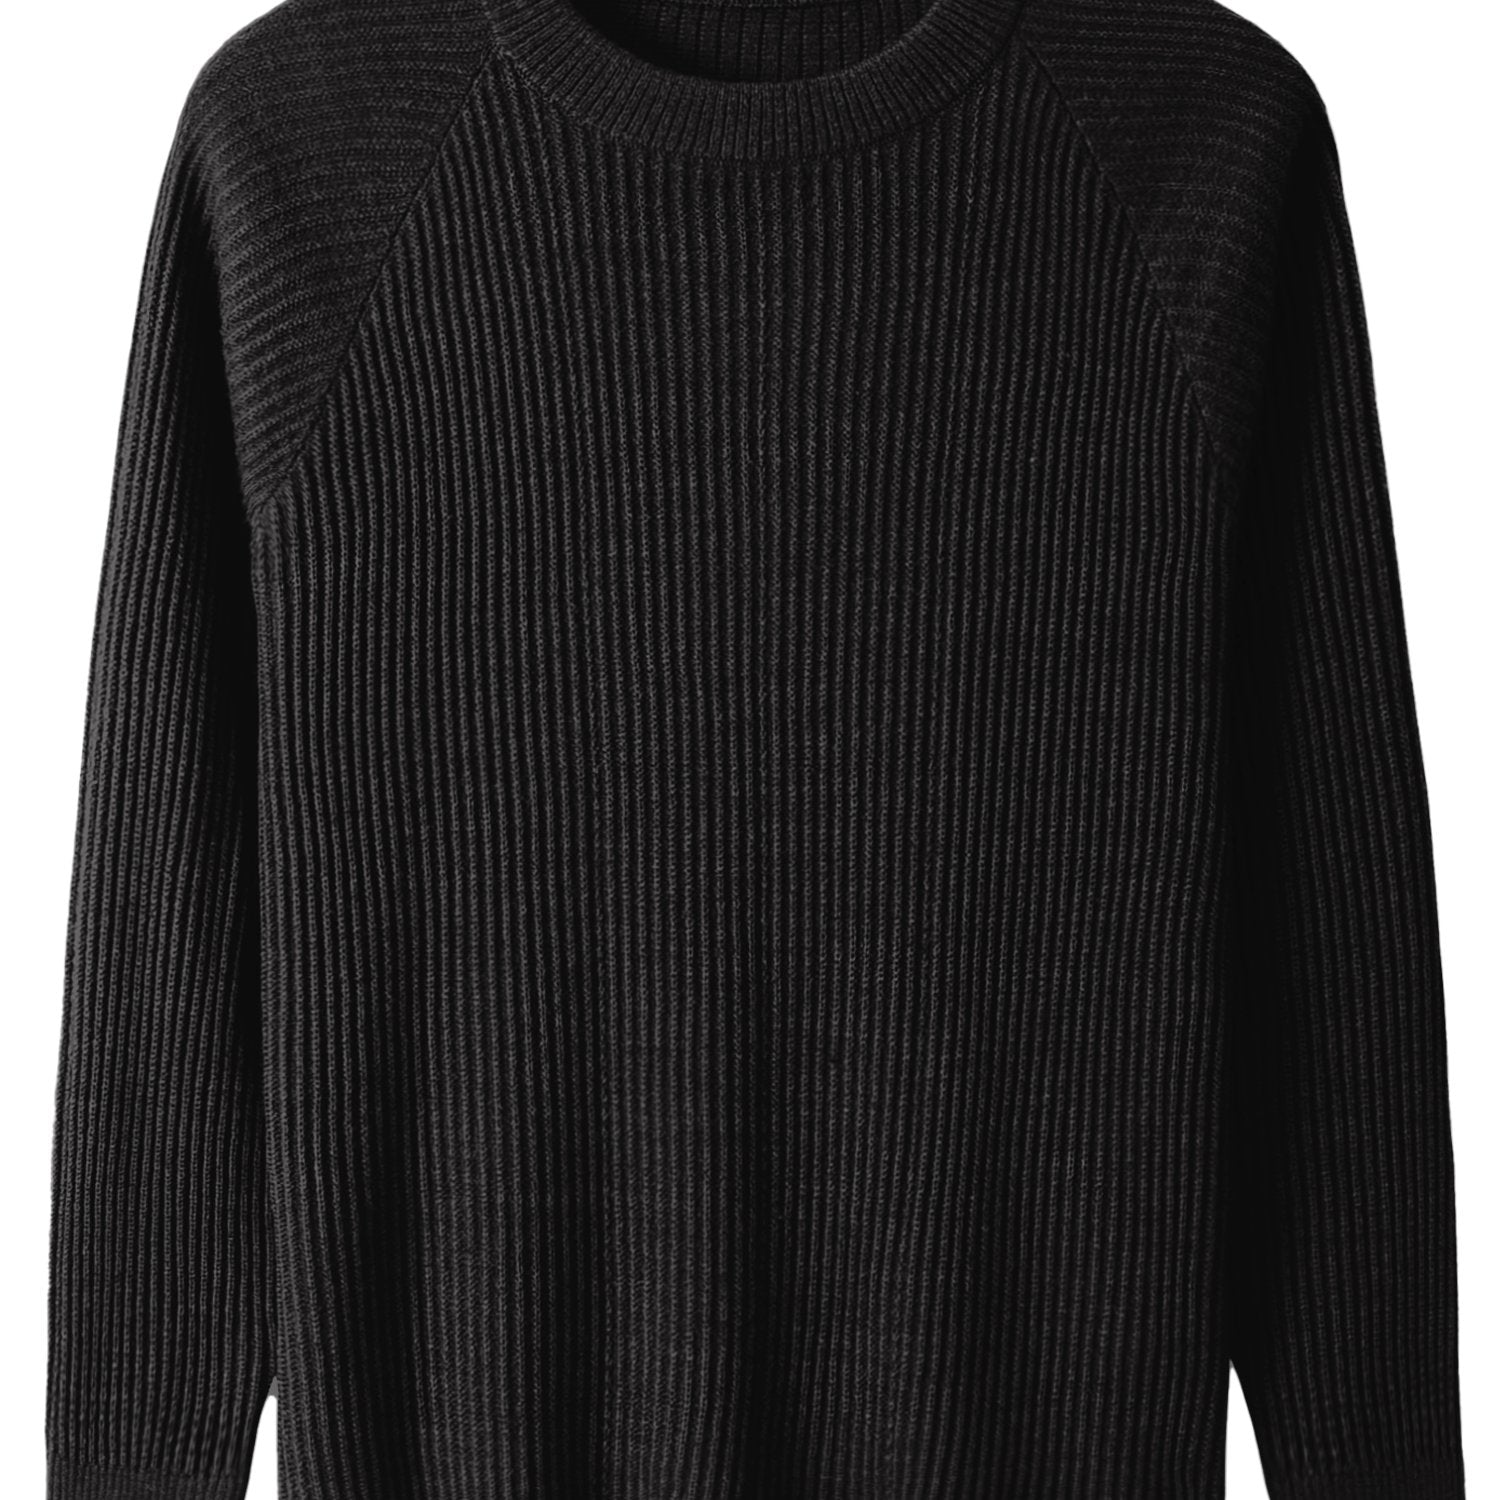 Men's Casual Warm Slightly Stretch Crew Neck Pullover Sweater